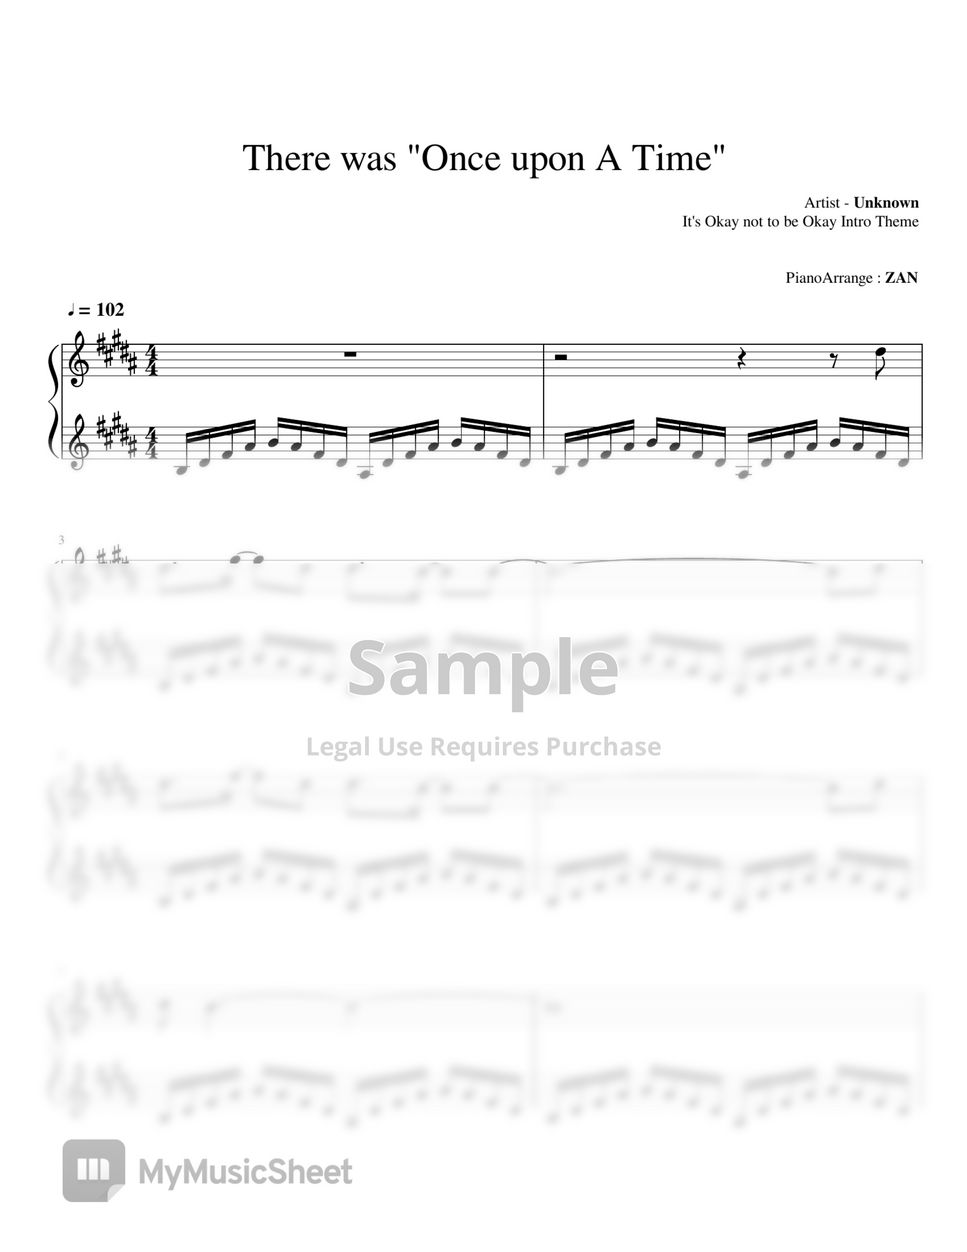 It's Okay not to be Okay - Intro Theme - There was "Once Upon A Time" | Piano by ZAN